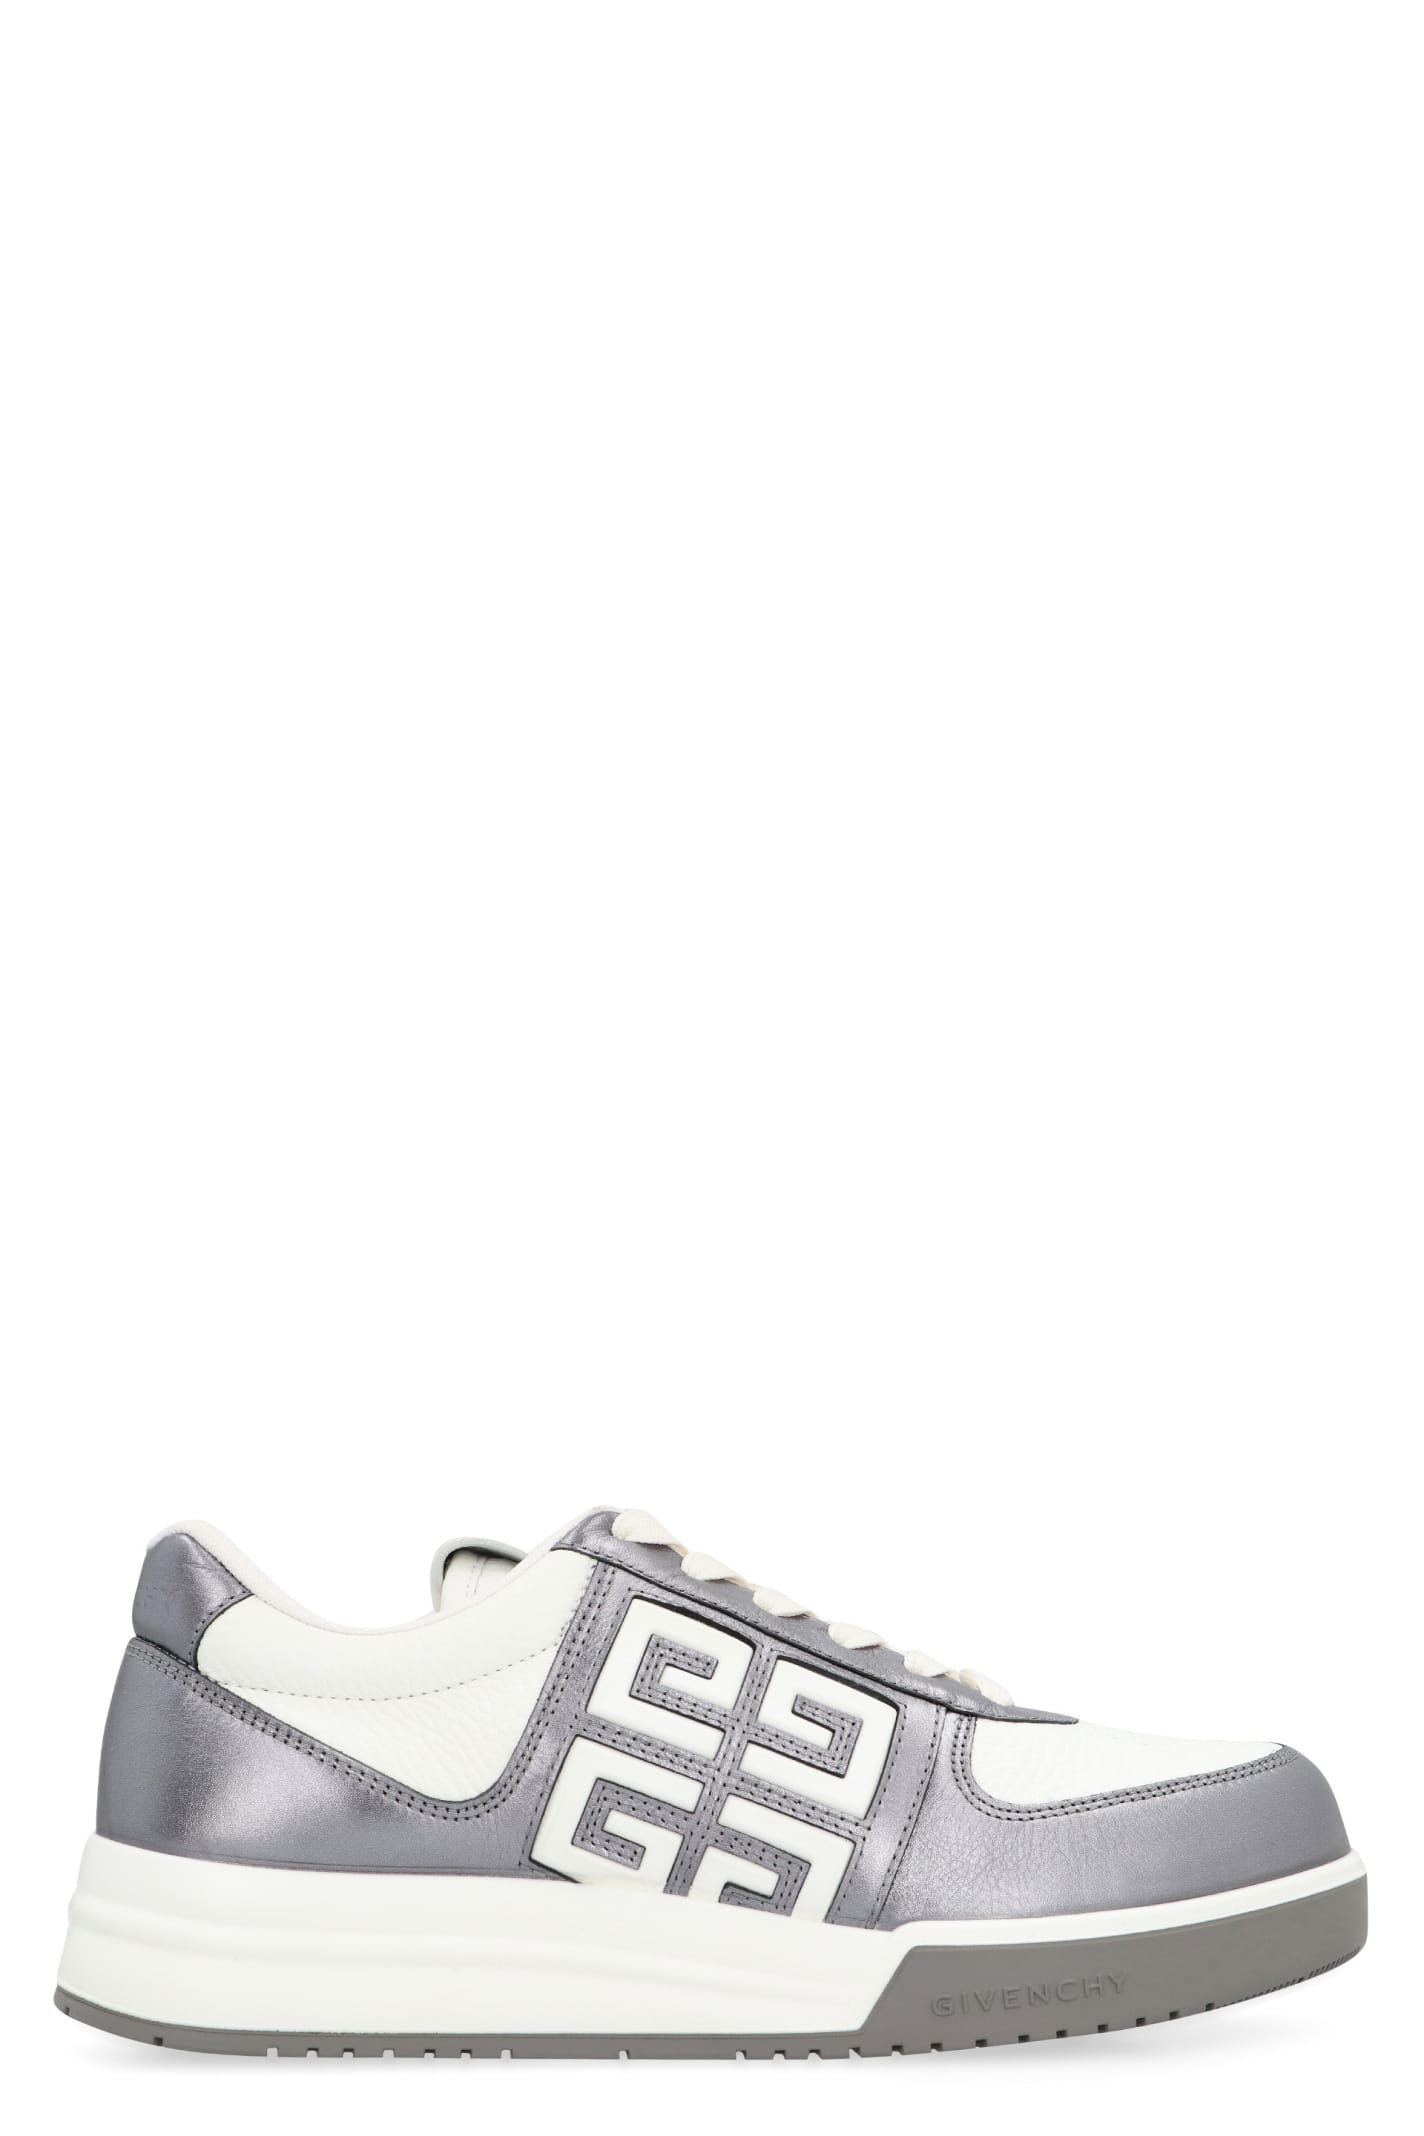 Shop Givenchy G4 Leather Low-top Sneakers In White/silvery